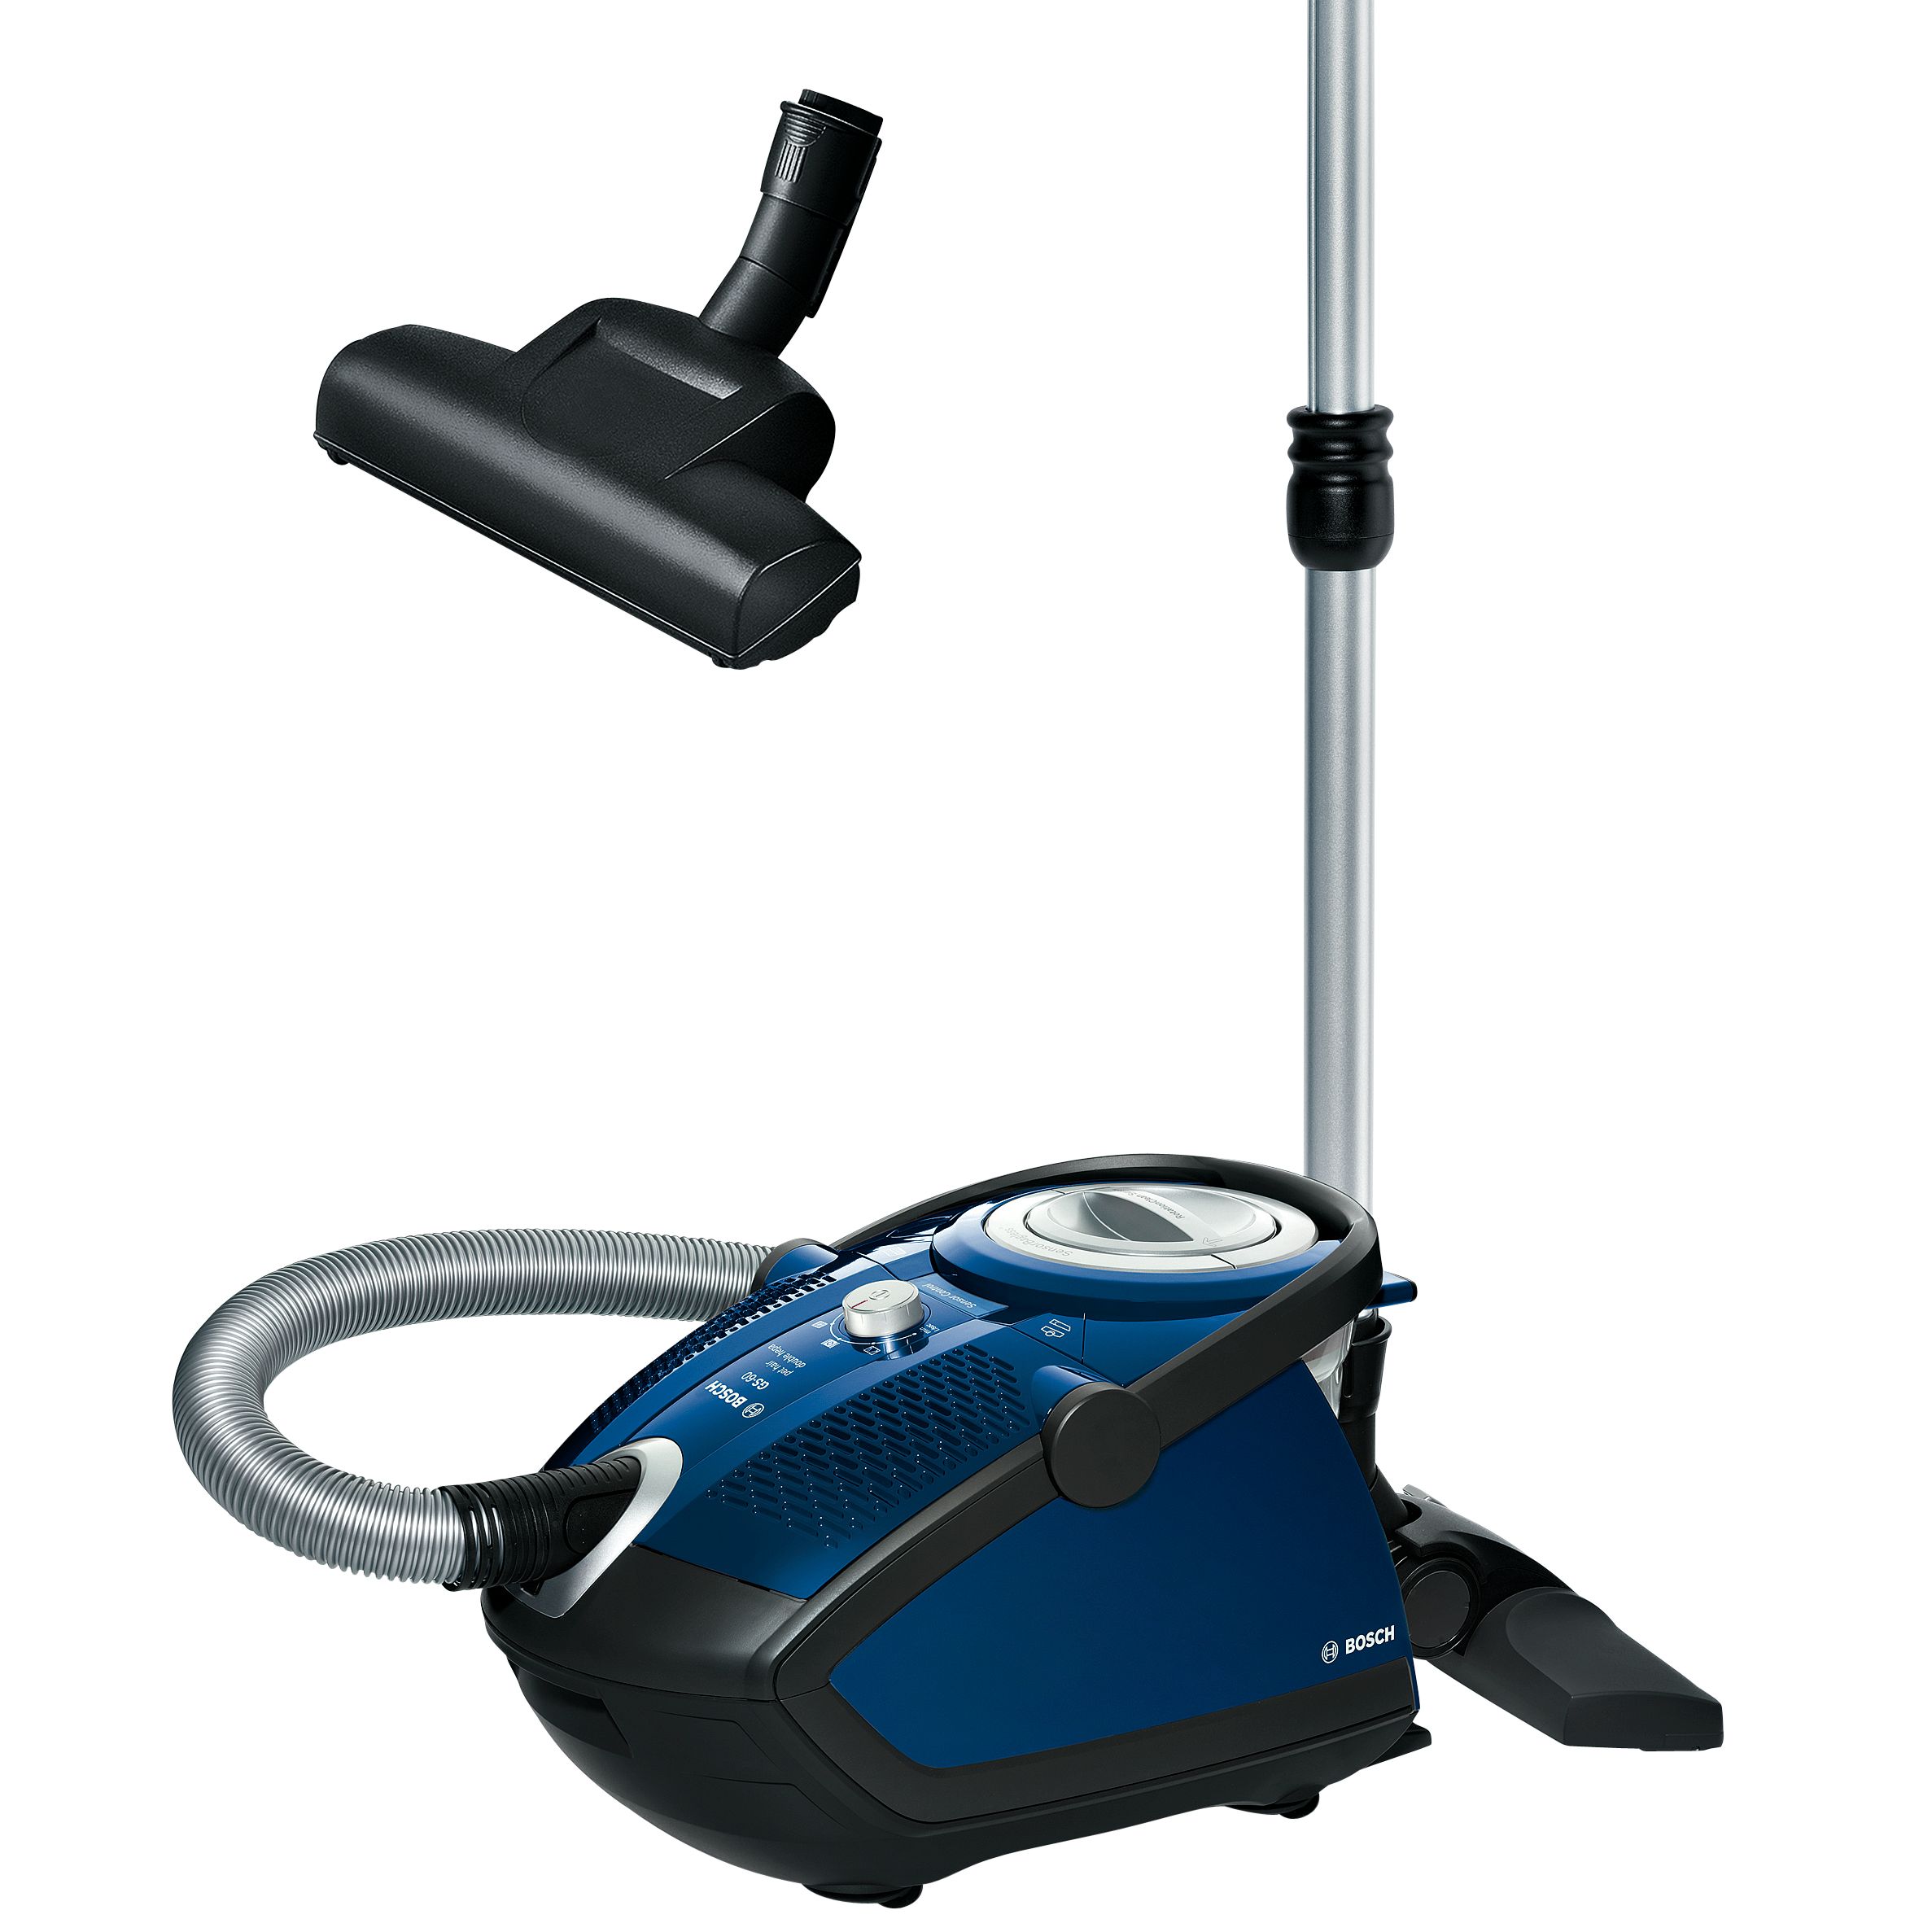 Bosch BSG6225GB Power Pet and Carpet Cylinder Vacuum Cleaner at John Lewis